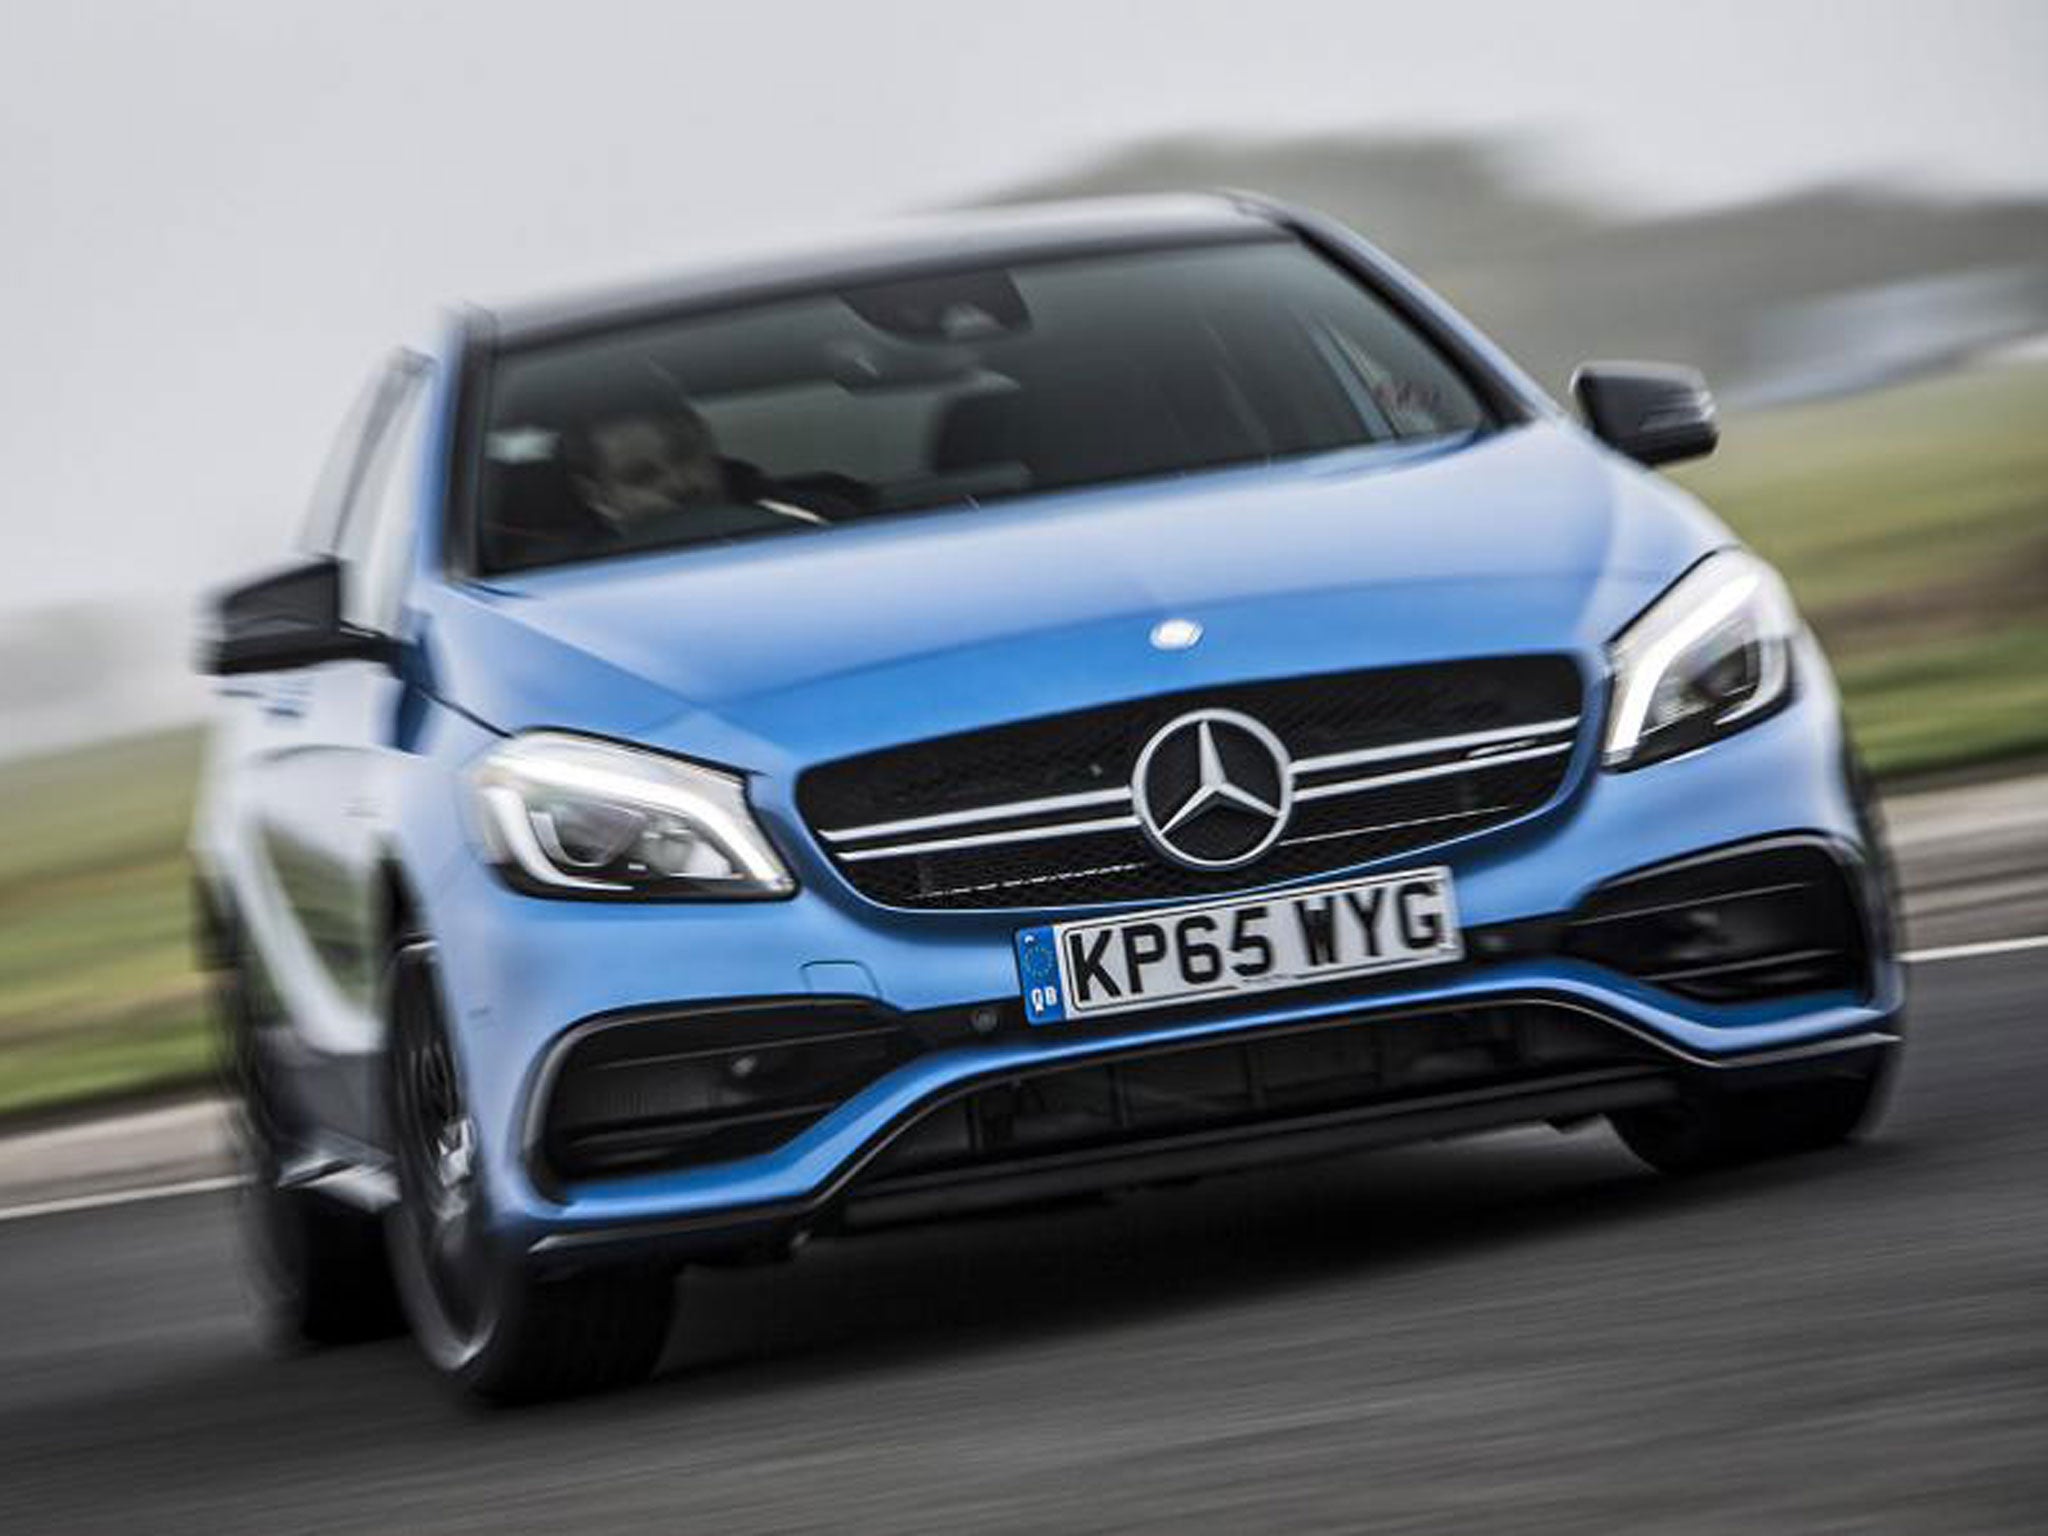 The AMG A45 will hit 62mph in 4.2 seconds